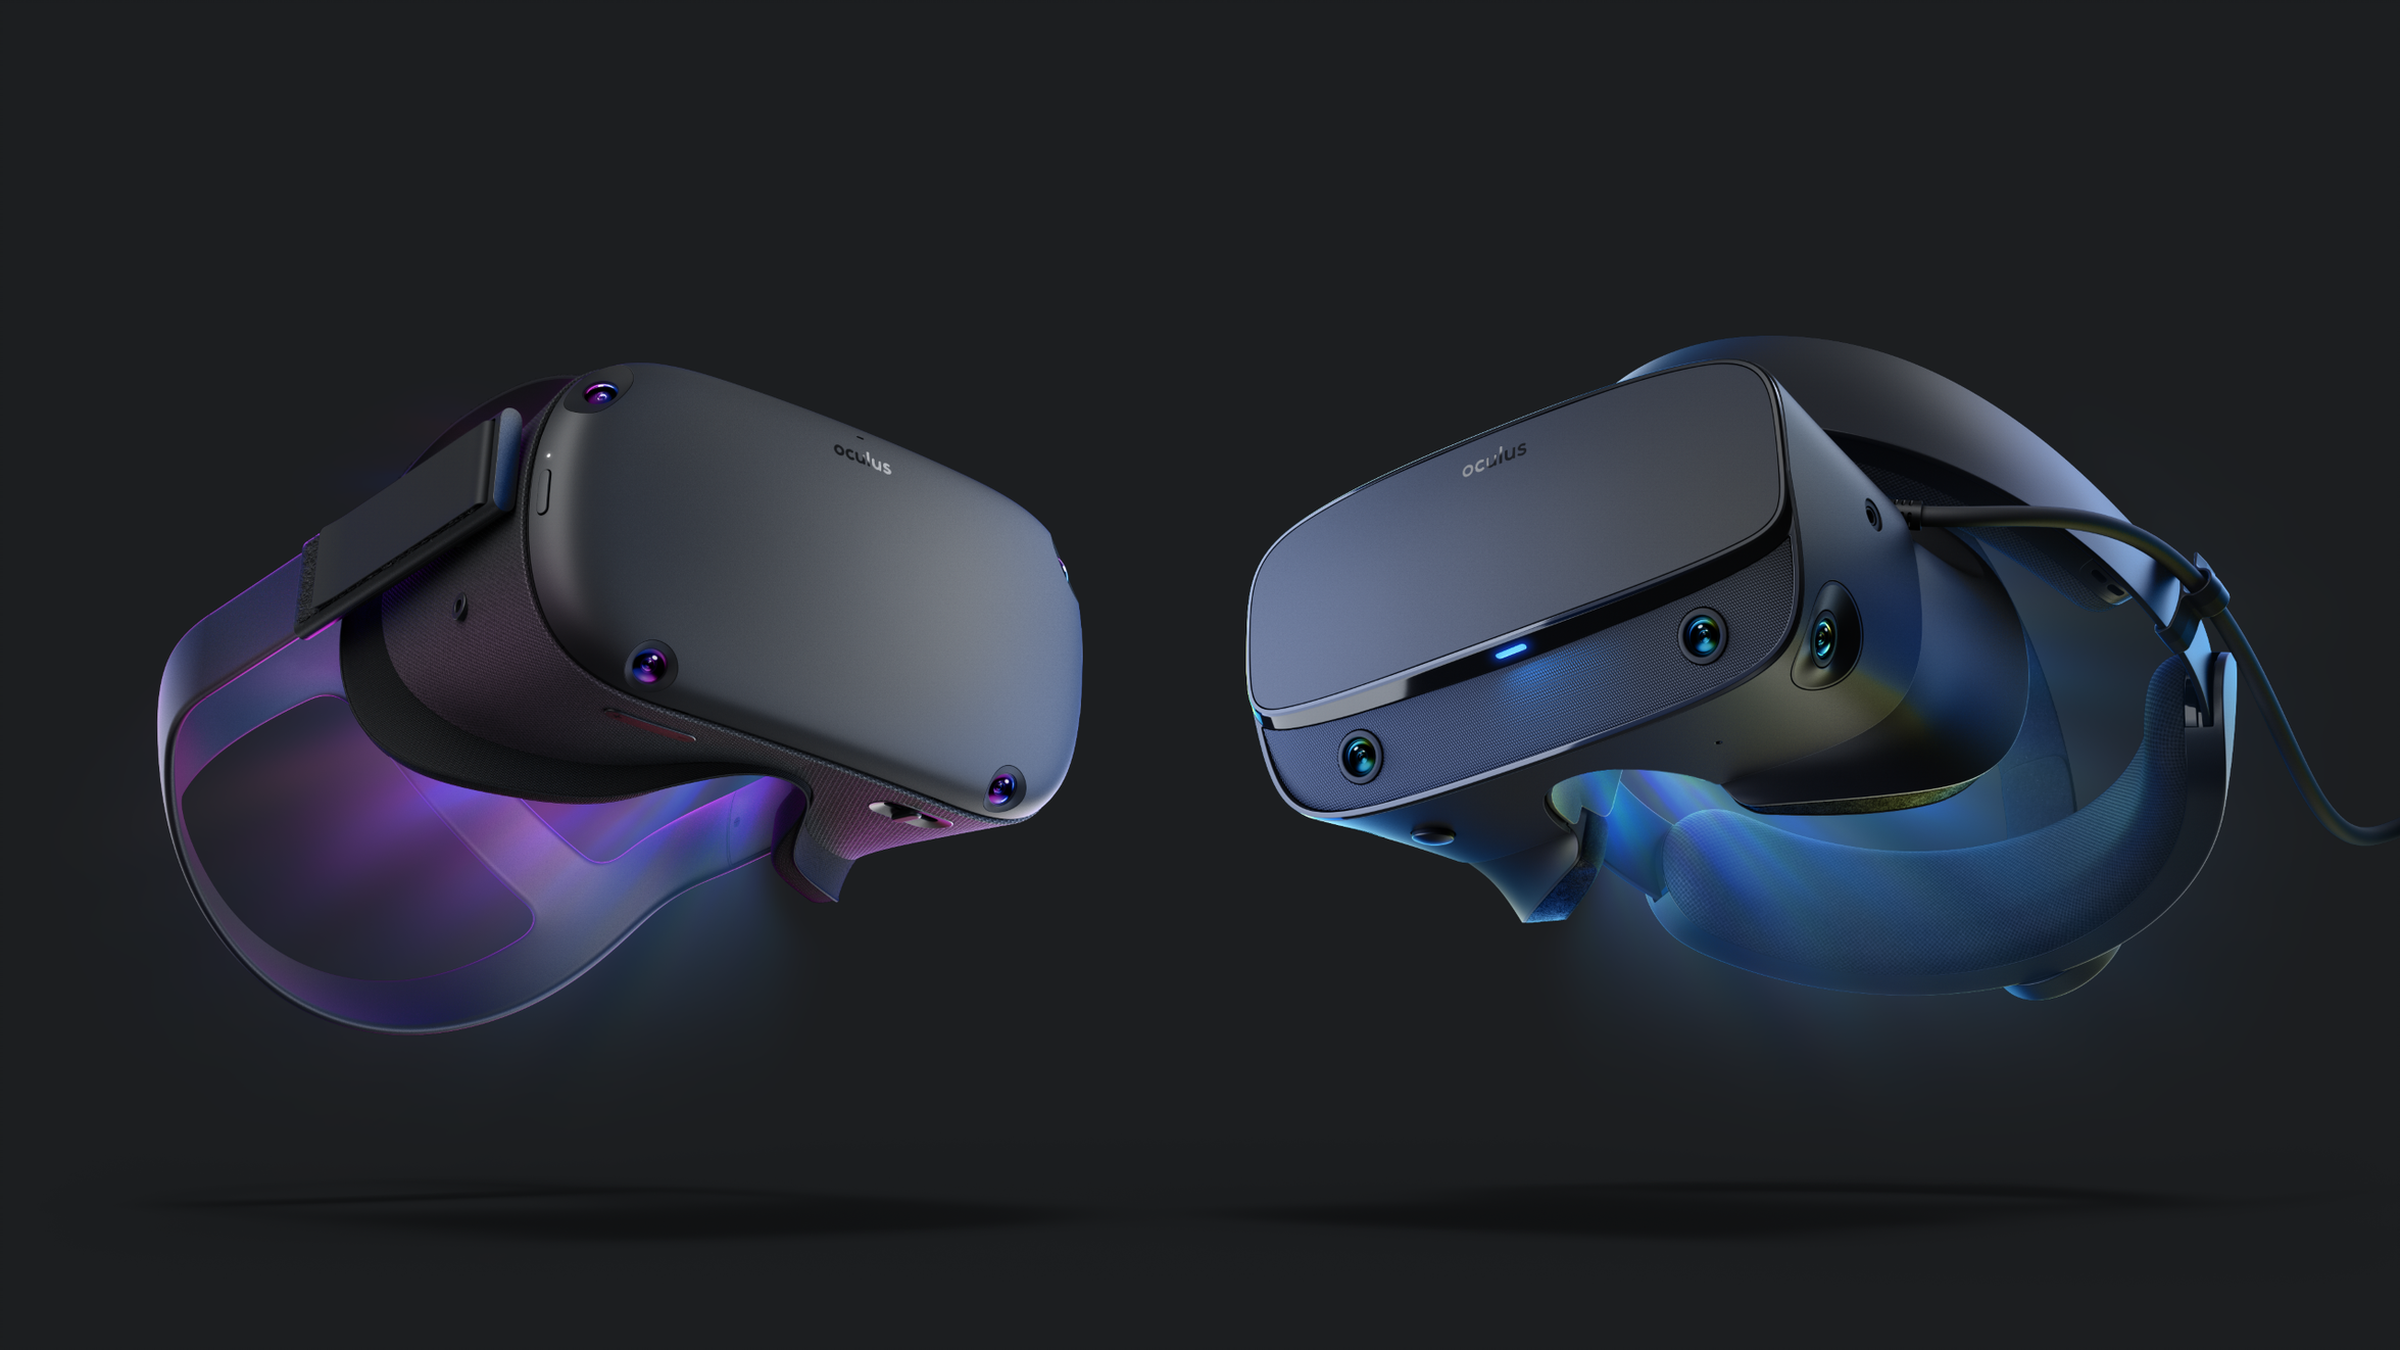 Both the Oculus Quest, left, and the Oculus Rift S, right, will ship for $399 this spring. 